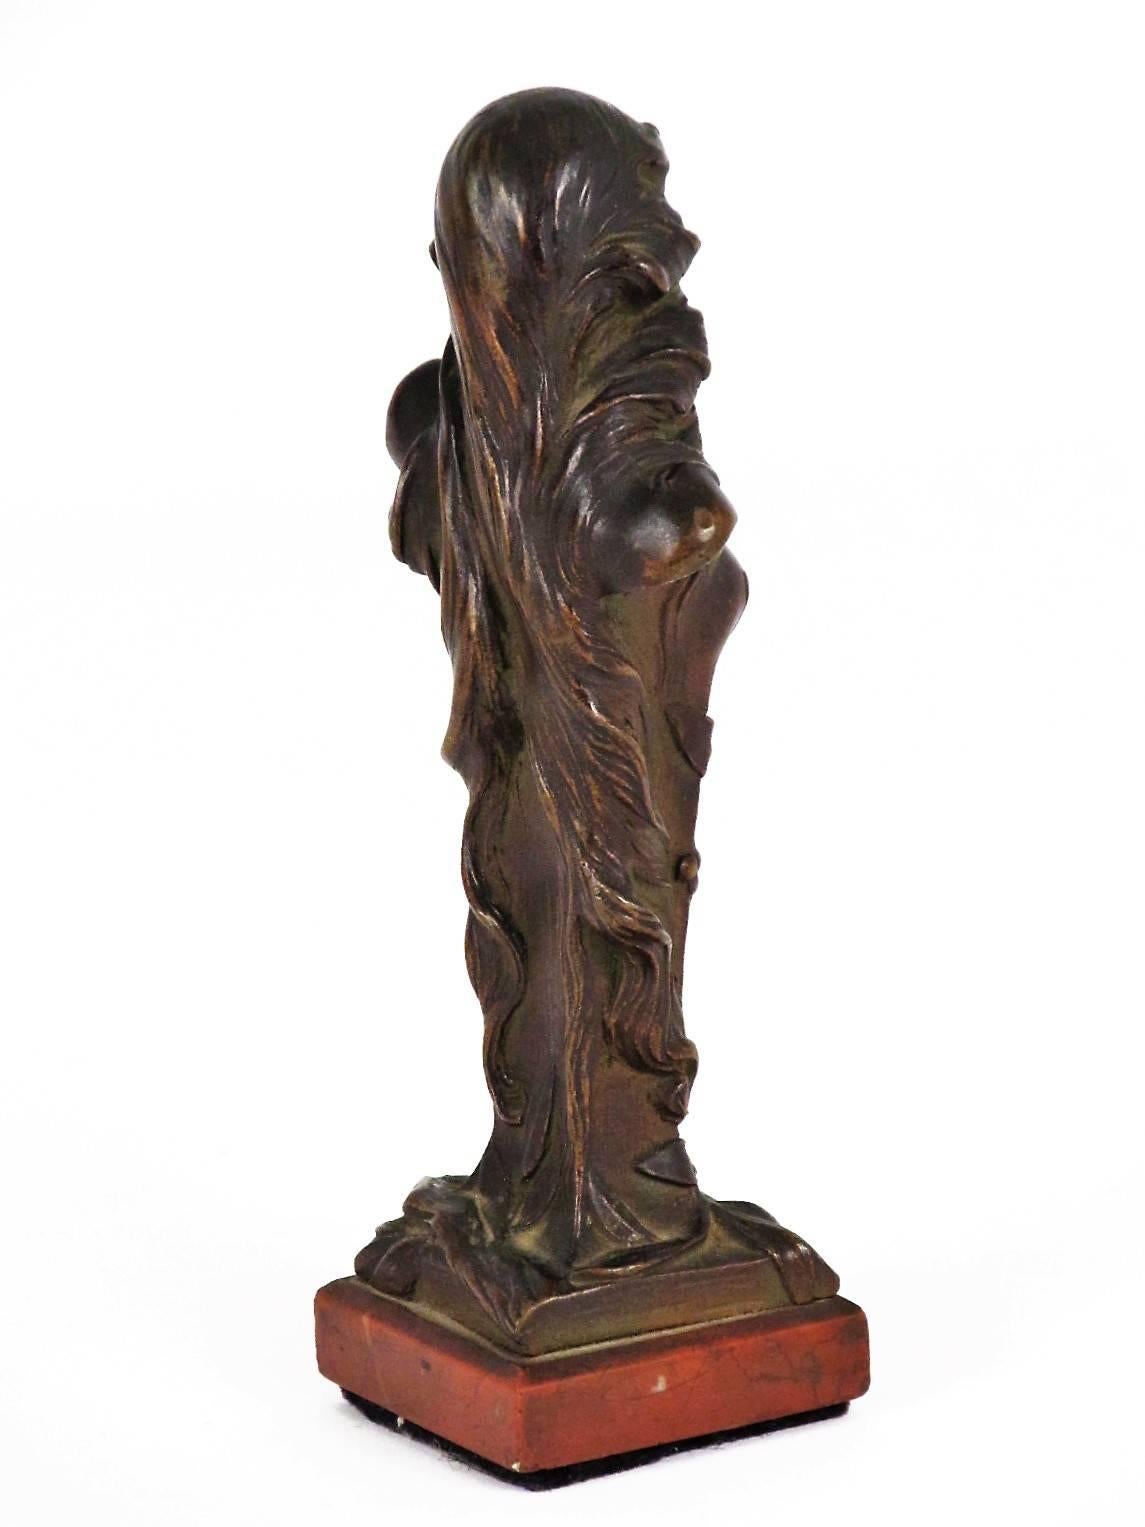 Lovely Diminutive Art Nouveau Bronze Bust on a Red Stone Base In Good Condition For Sale In Papaikou, HI